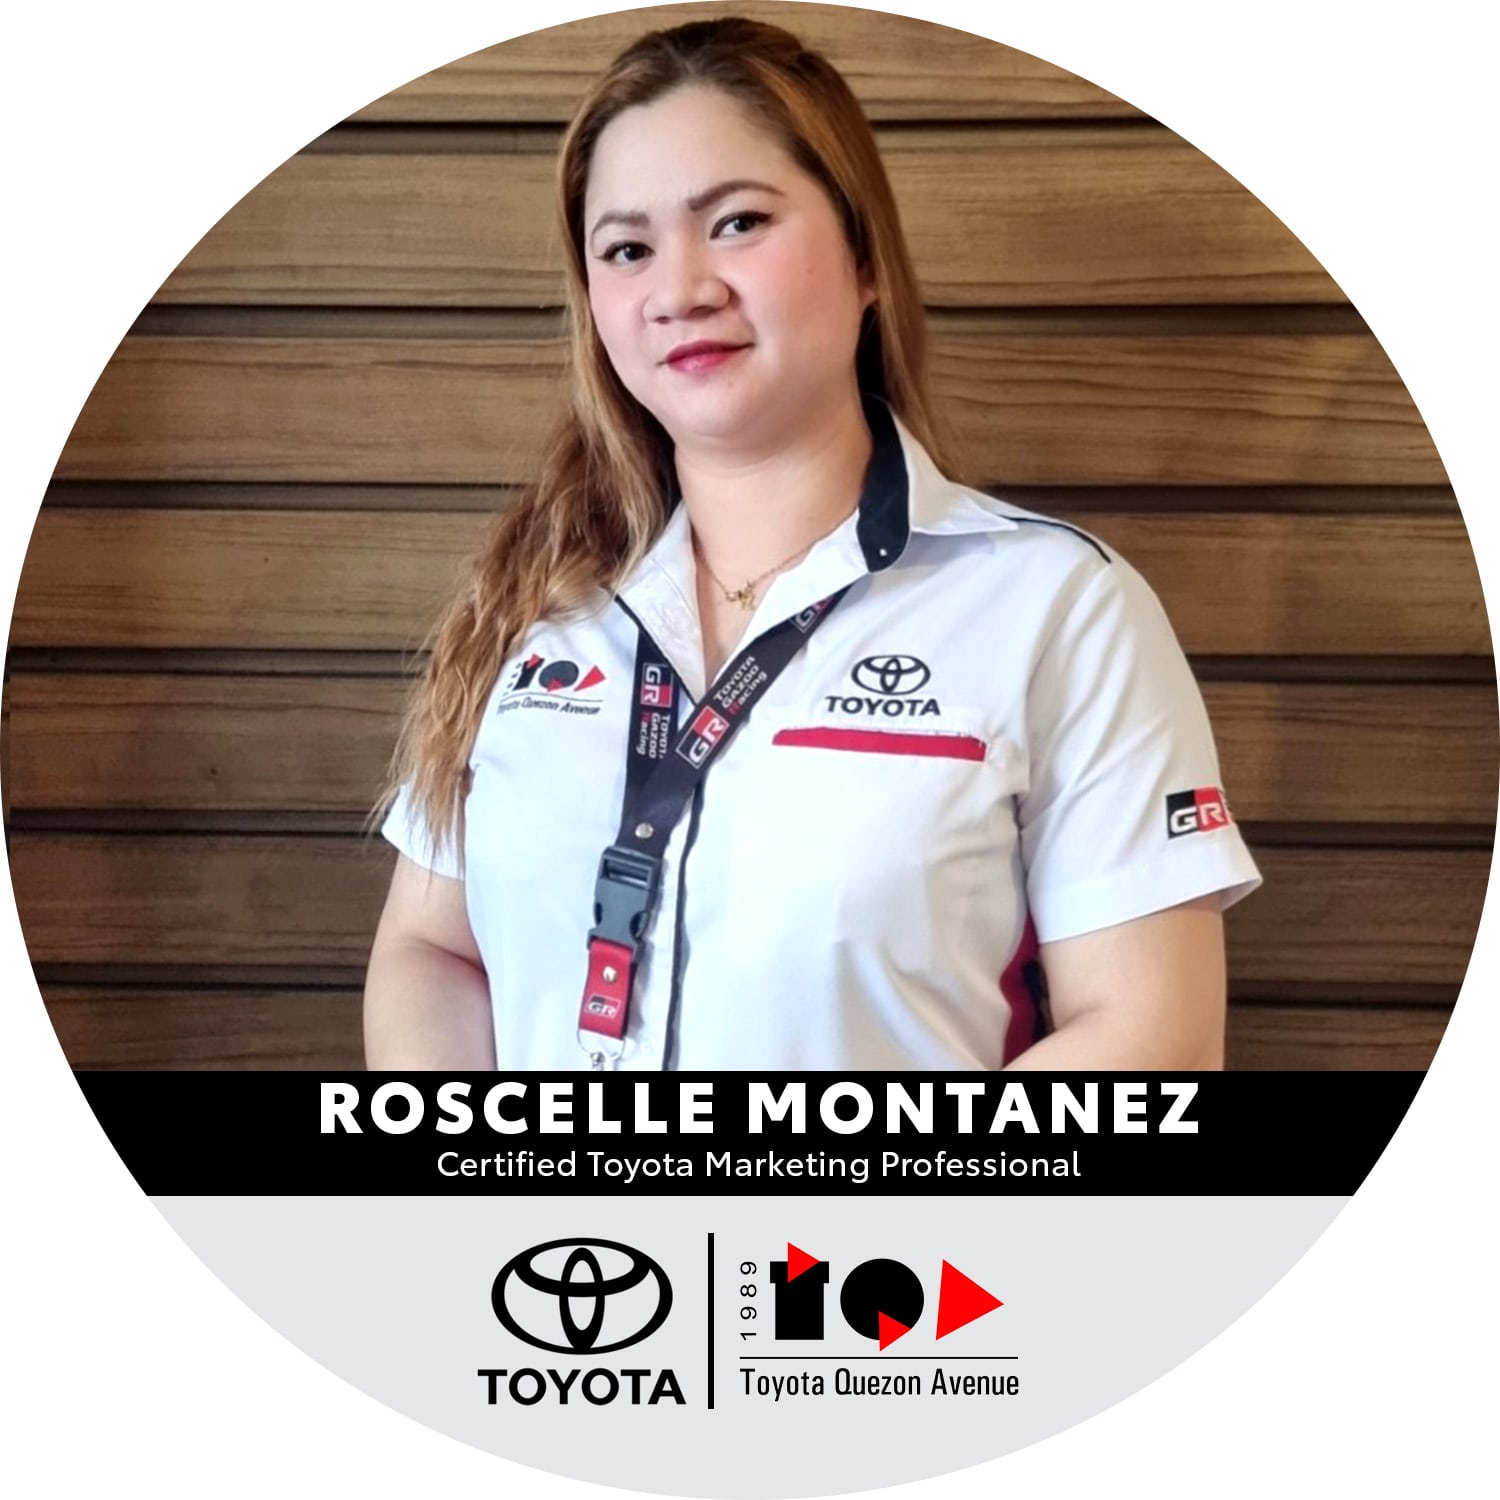 Certified Toyota Marketing Professionals - Roscelle Montanez